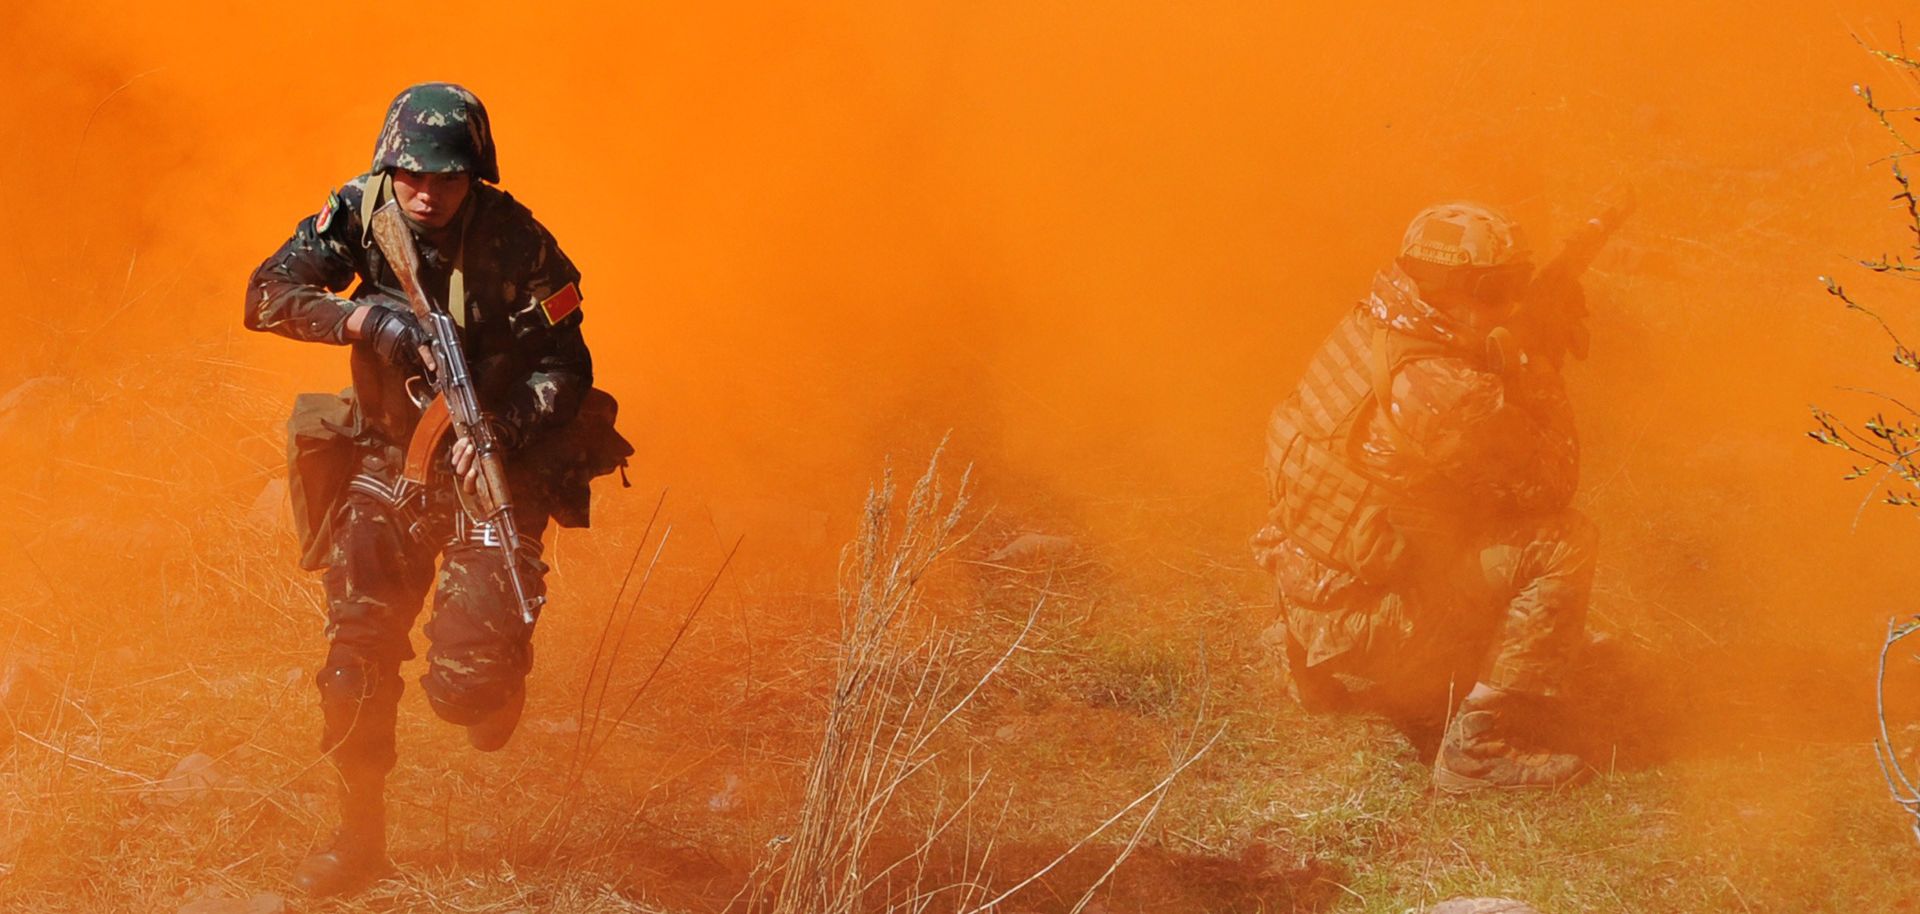 Soldiers run through smoke during joint military exercises in Kyrgyzstan involving participants from the Shanghai Cooperation Organization (SCO) member states, April 24.